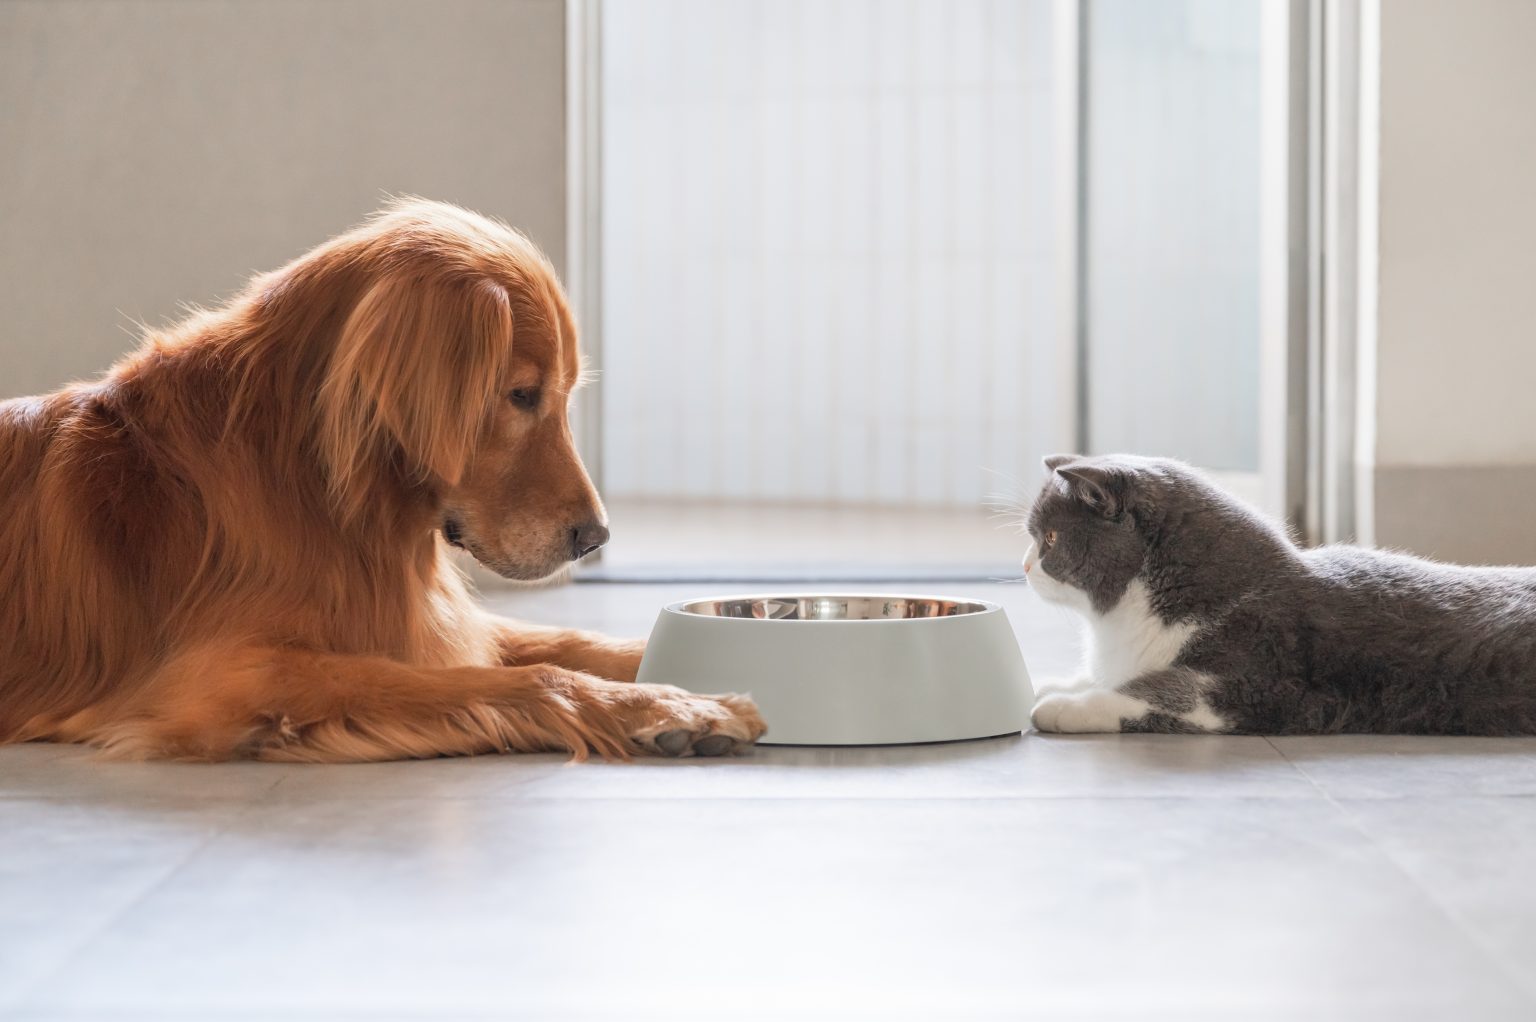 Should your pet switch to a vegan diet?